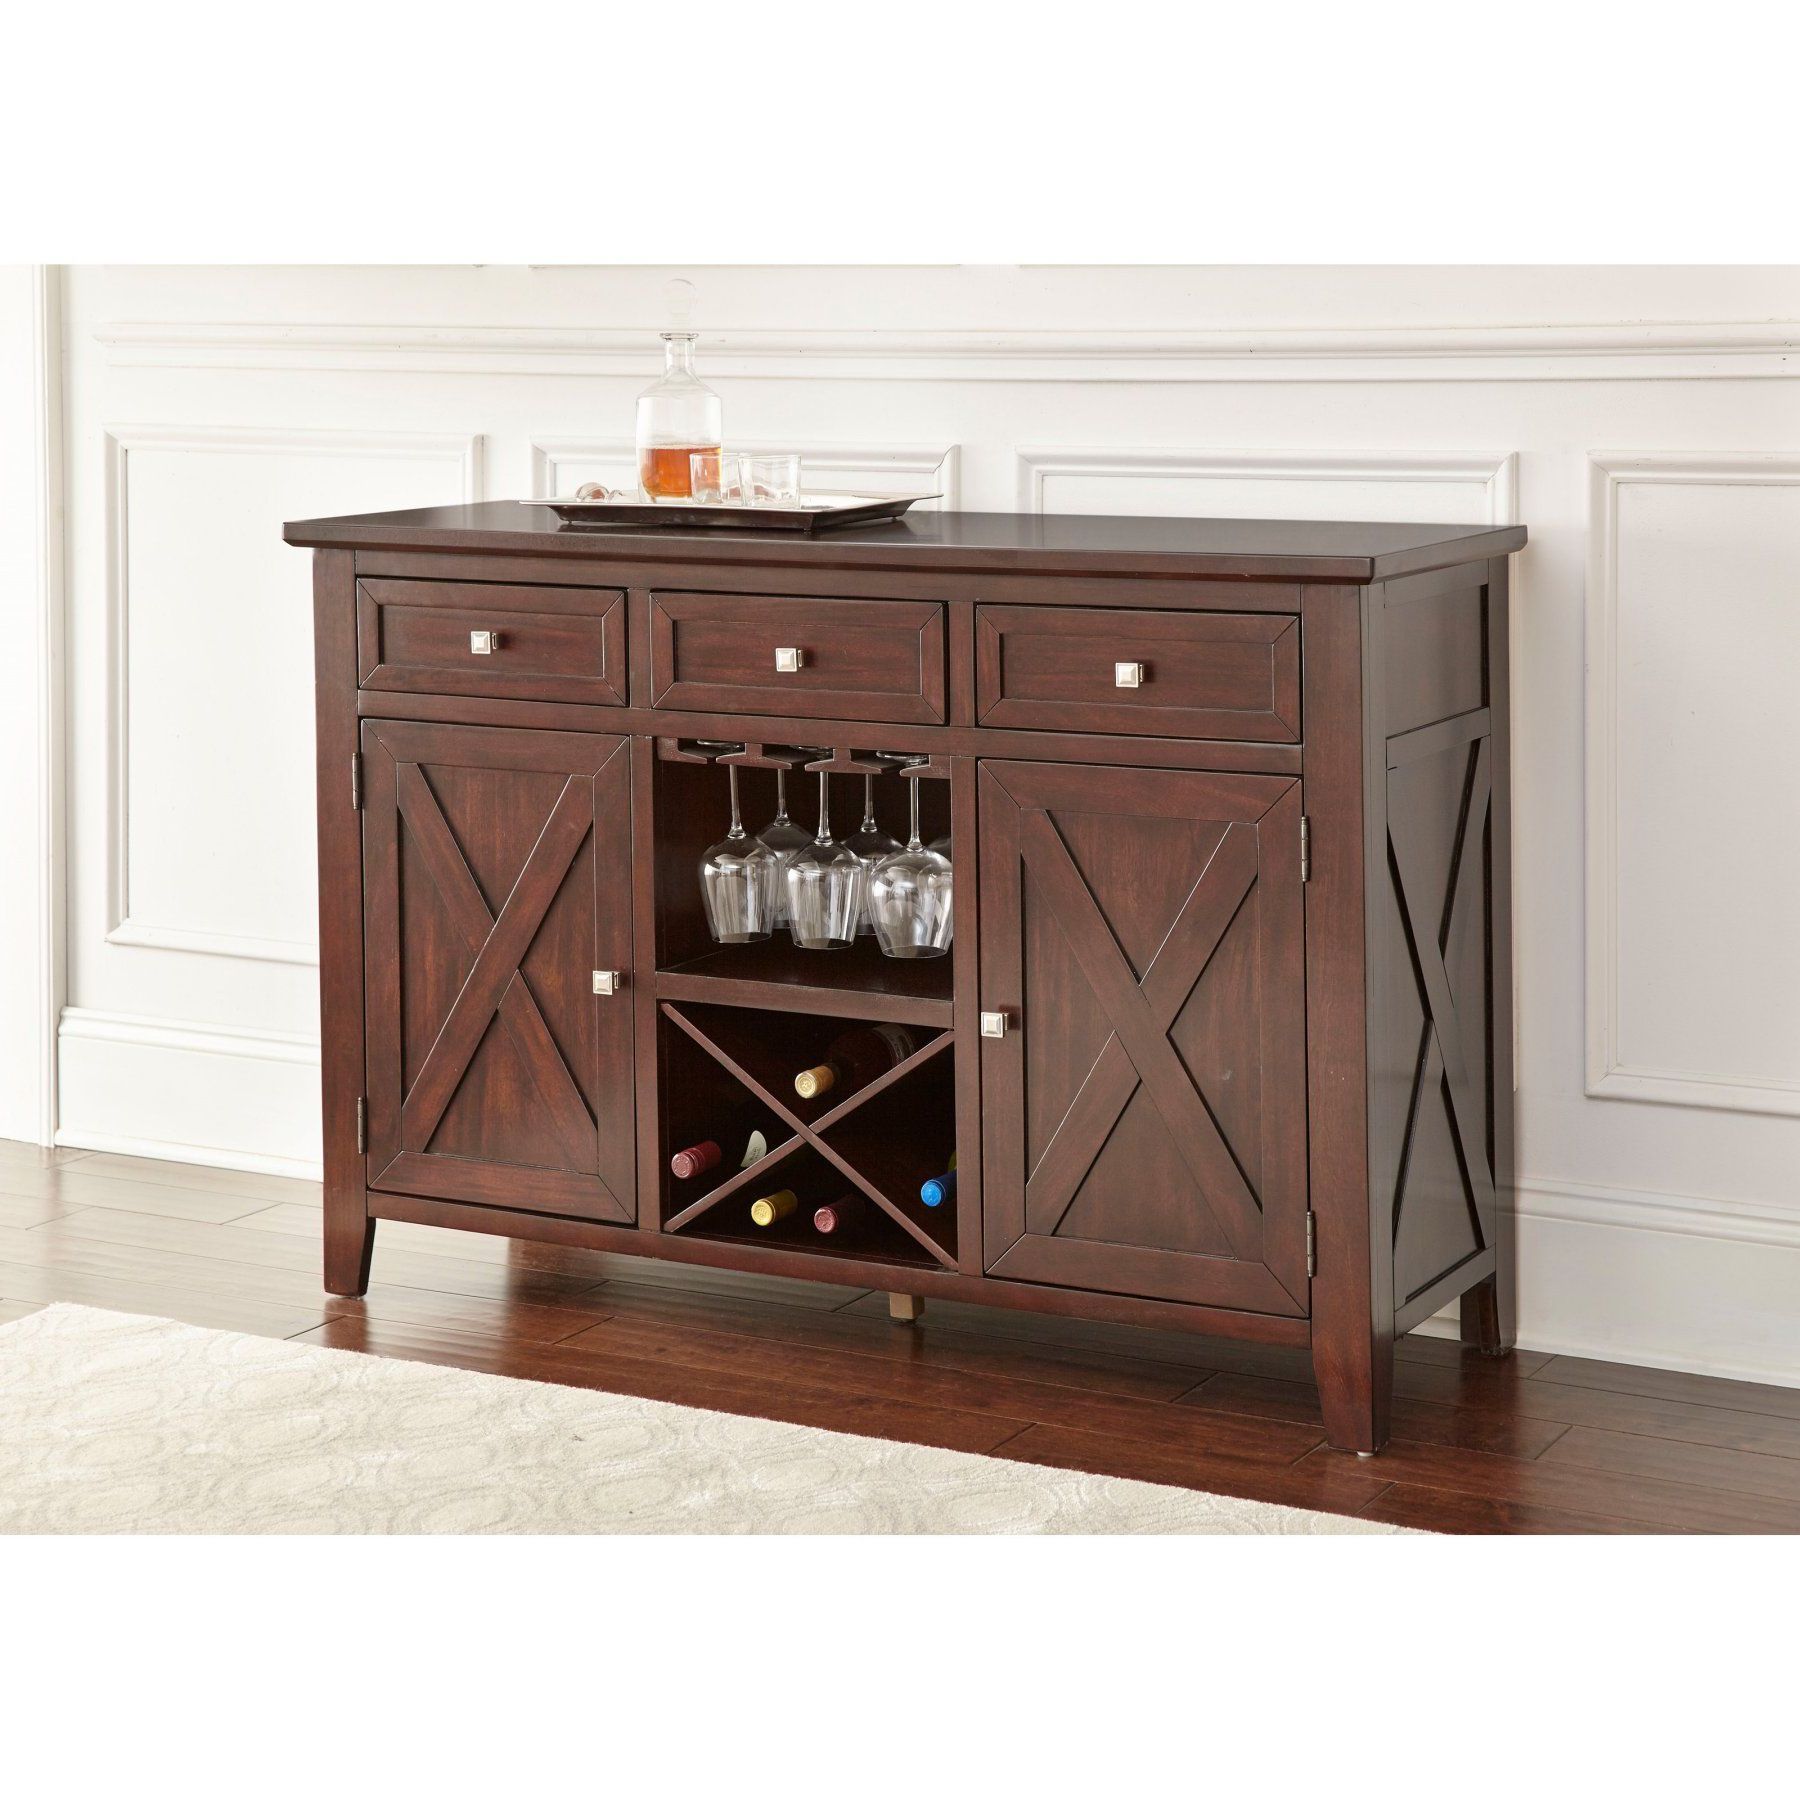 2019 Payton Serving Sideboards Throughout Steve Silver Adrian Server – Ad600sv (View 8 of 20)